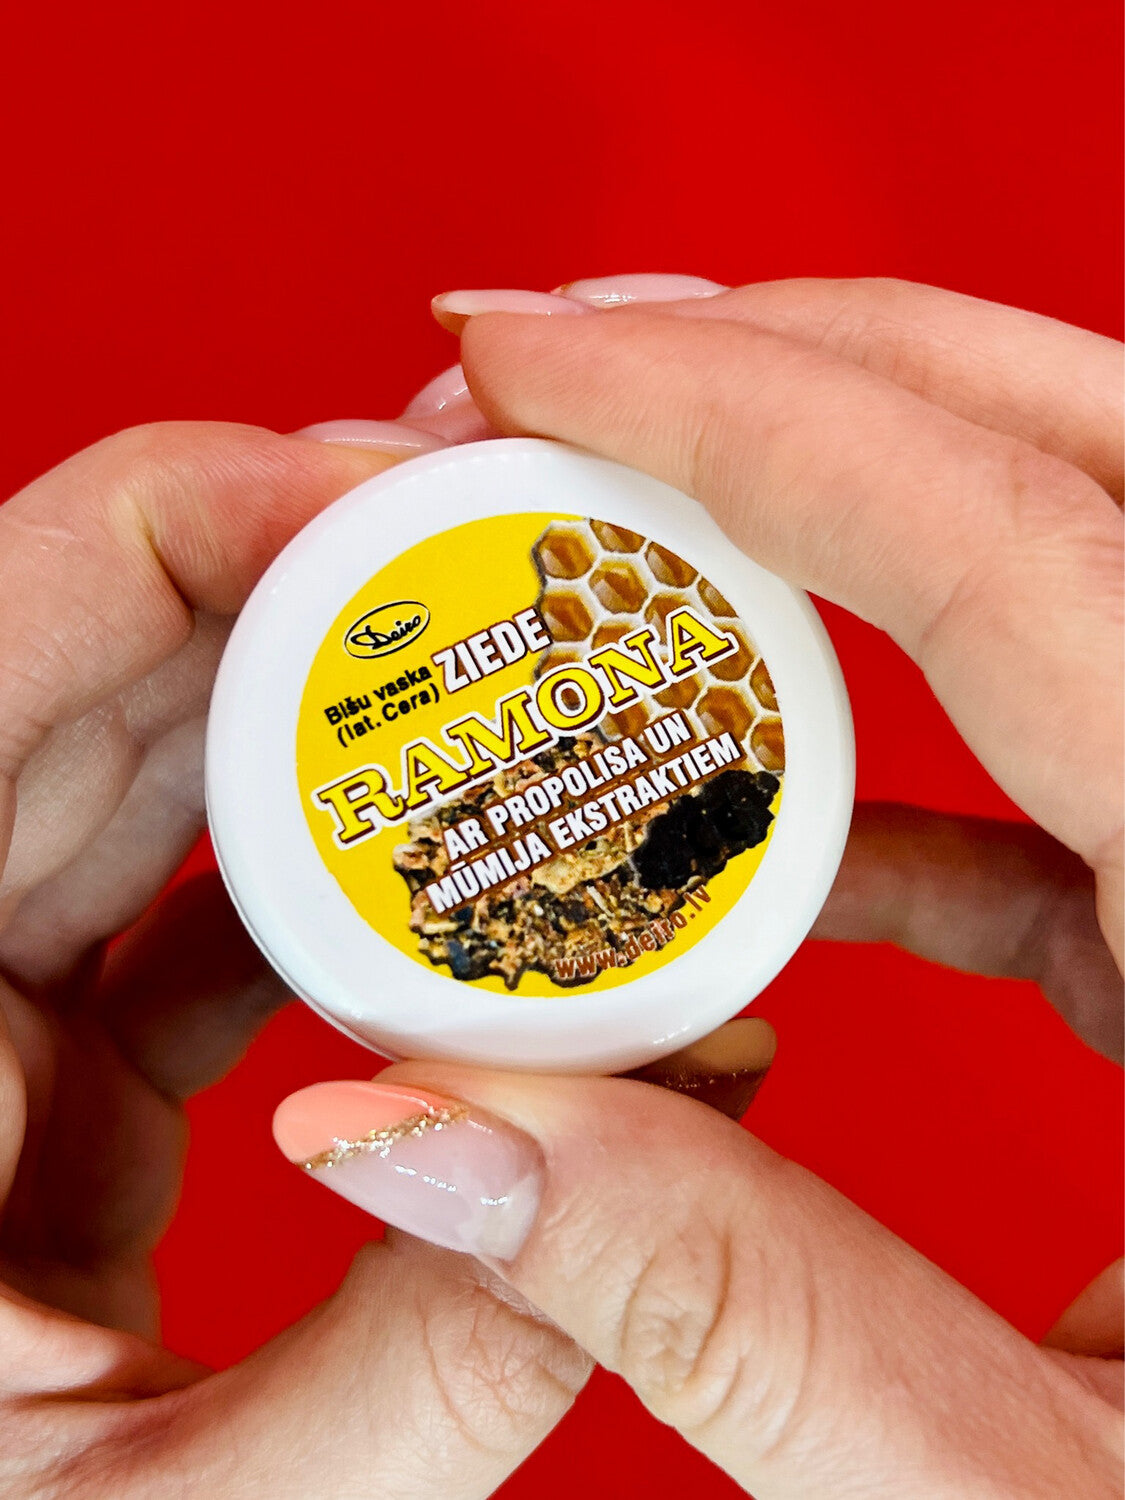 Beeswax ointment "Ramona" with propolis and mummy extracts 10g